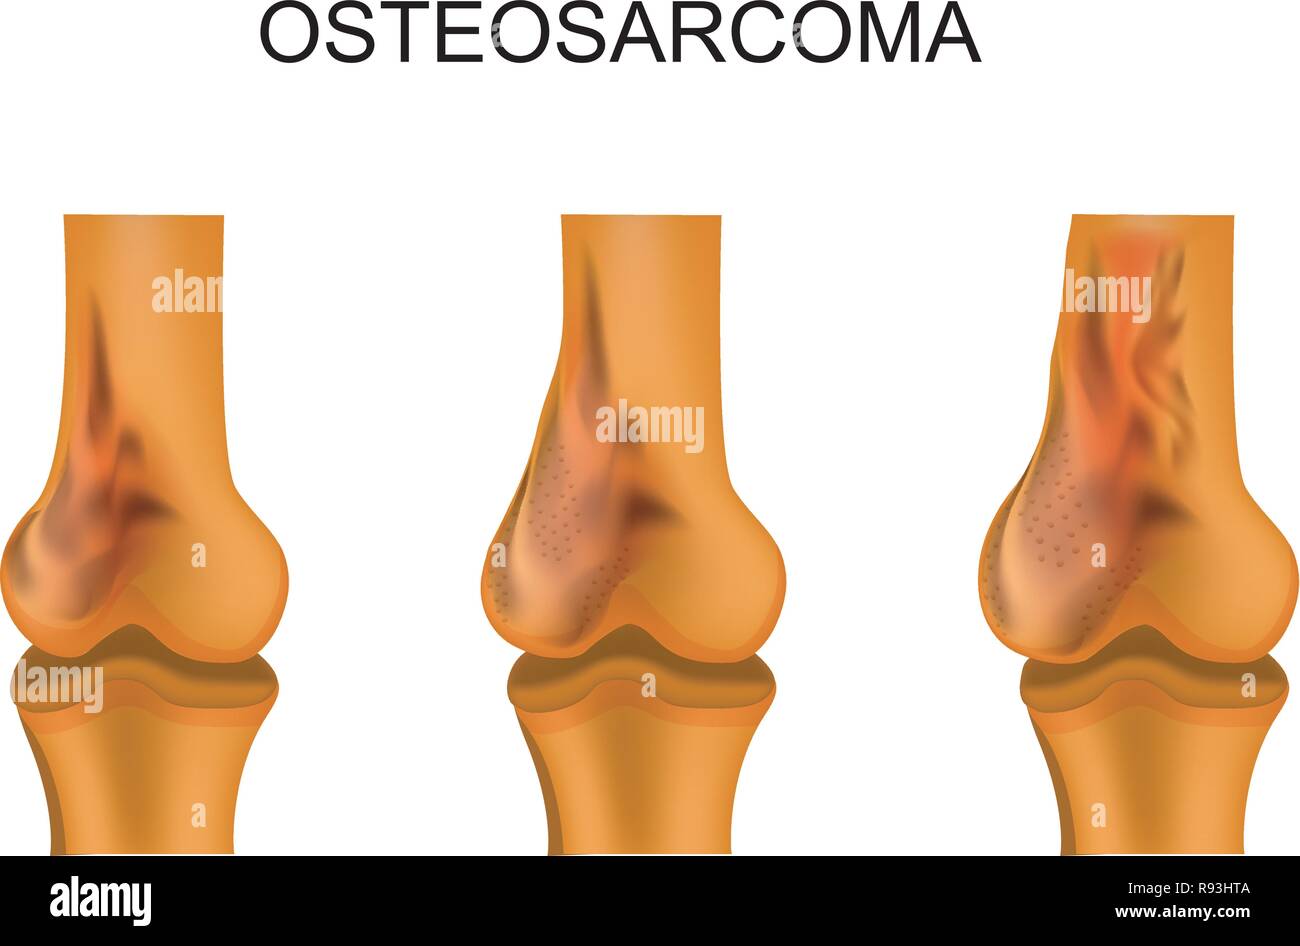 vector illustration of a femur affected by osteosarcoma Stock Vector